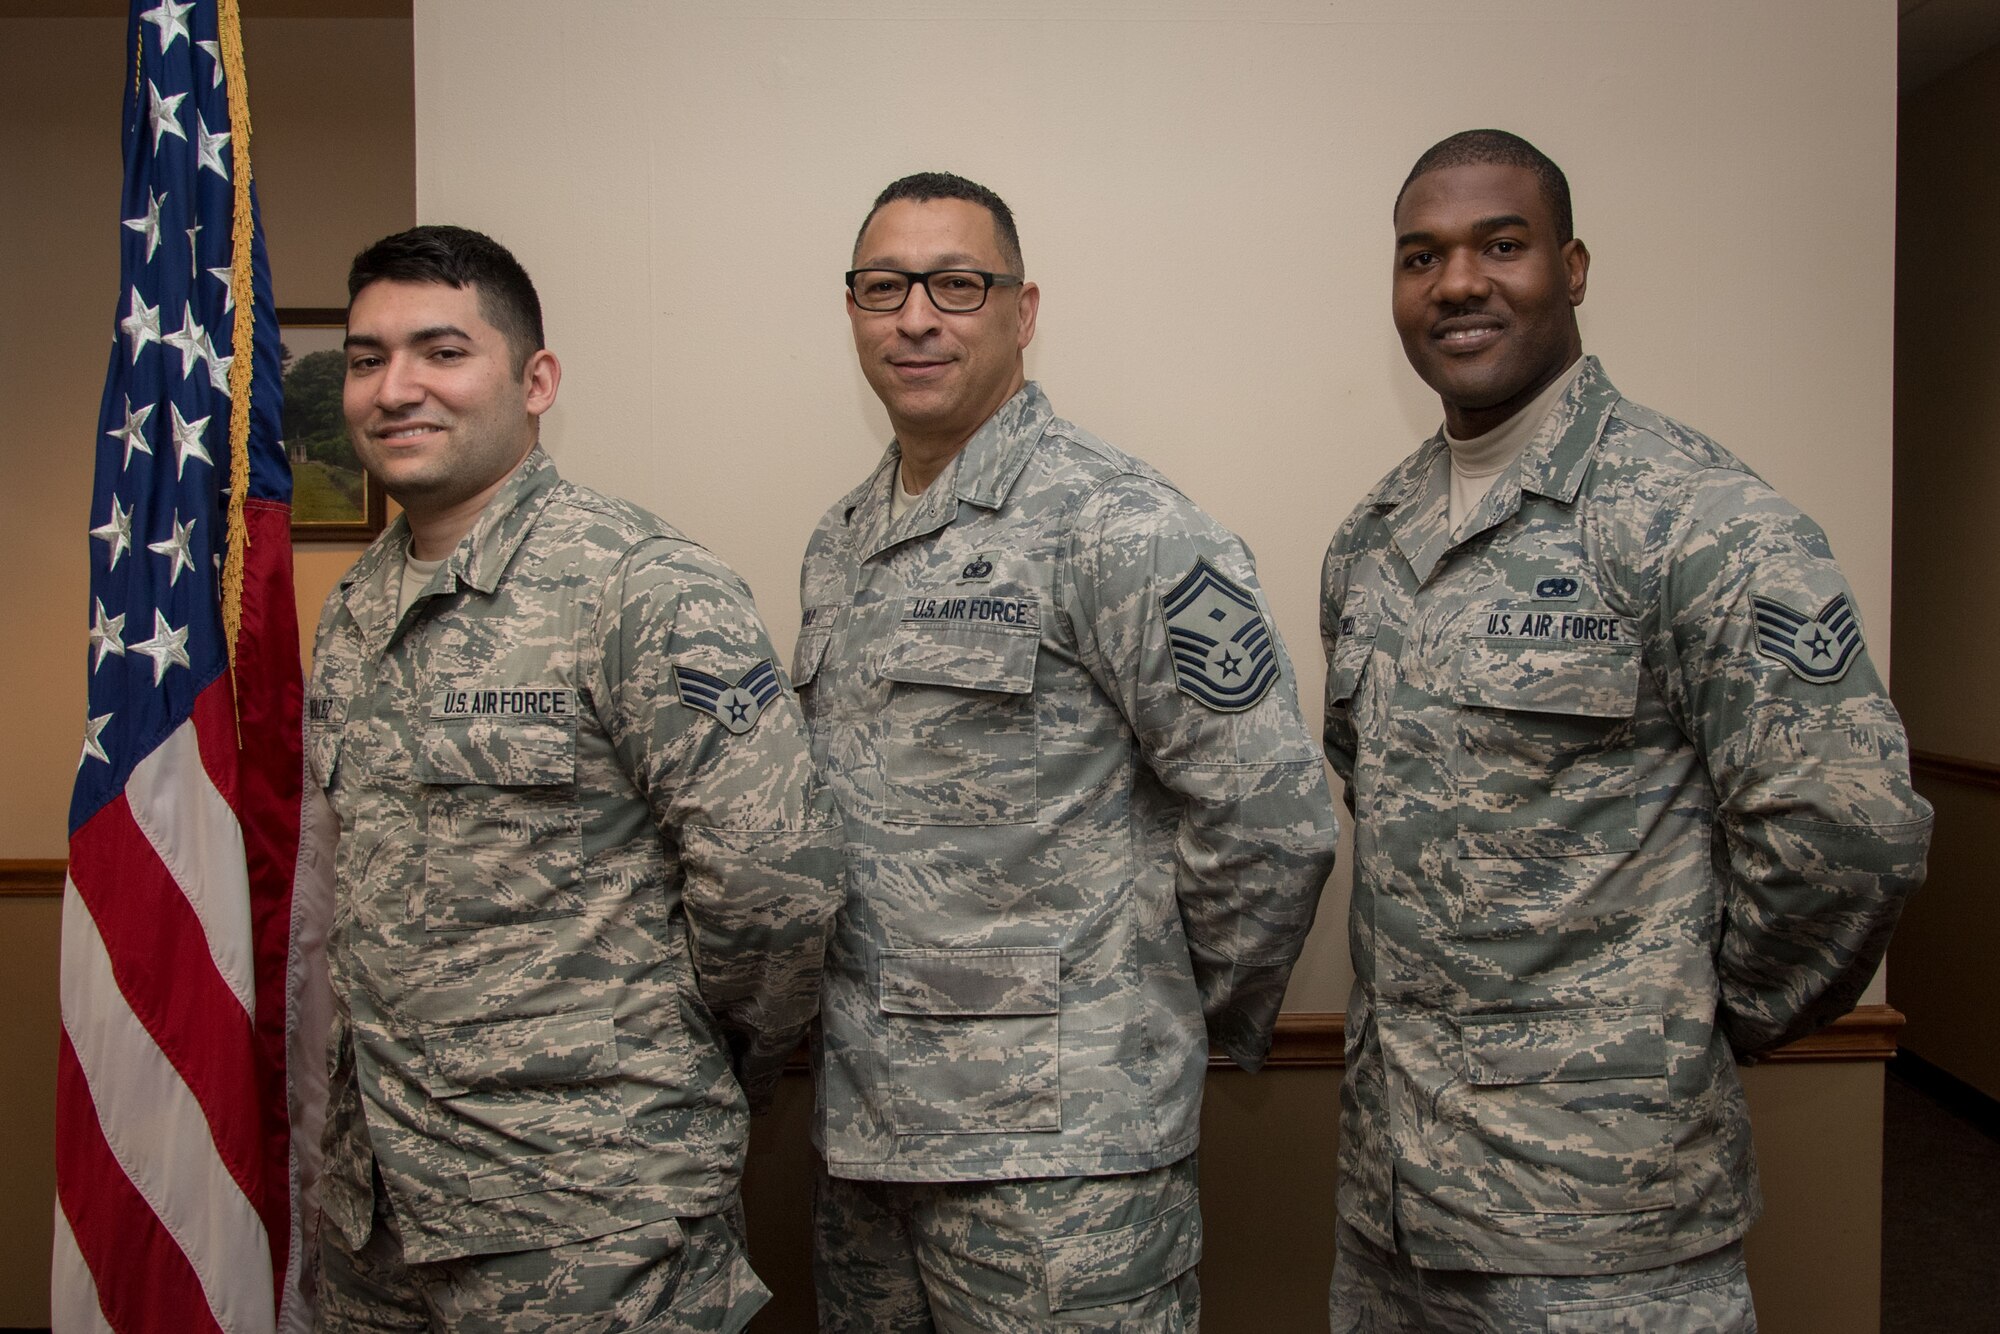 Senior Airman Saul Gonzalez, 514th Aeromedical Staging Squadron medic, Senior Master Sgt. David Gold, 88th Aerial Port Squadron first sergeant, and Staff Sgt. Ainsley J. Atwell, 714th Aircraft Maintenance Squadron aerospace propulsion and jet mechanic, all with the 514th Air Mobility Wing, Joint Base McGuire-Dix-Lakehurst, N.J., pose for a photo May 5, 2019, here. The three Reserve Citizen Airmen split their time between working as Airmen in three different squadrons at the Freedom Wing and firefighters at Engine Company 238 of the New York City Fire Department. Gold, a lieutenant in the FDNY, supervises Atwell and Gonzalez while at work in the firehouse.